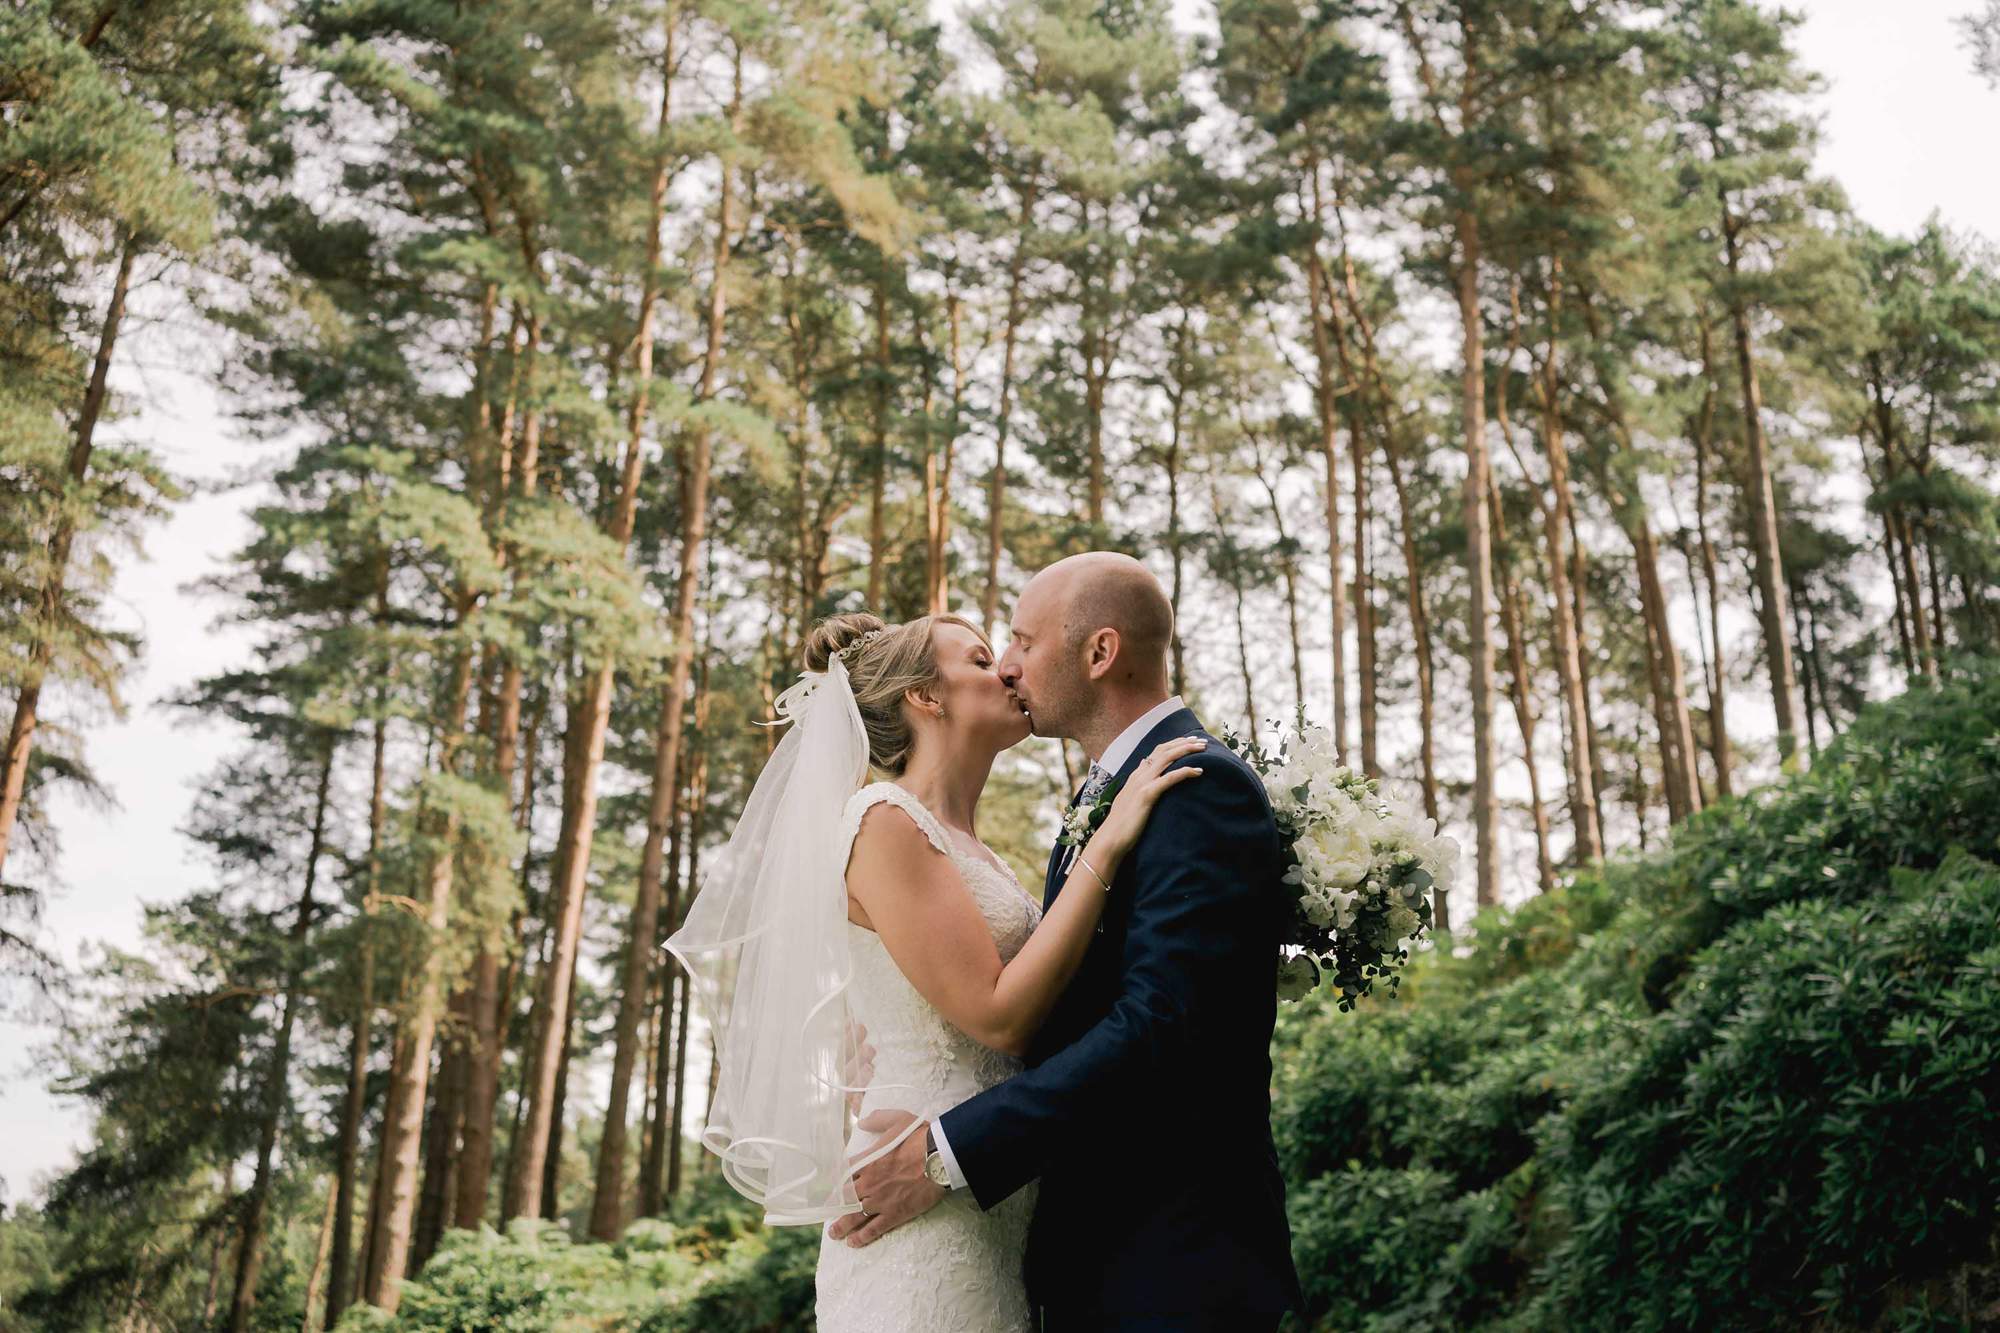 A couple kiss on their wedding day in the woodlands at Old Thorns Hotel in Liphook.